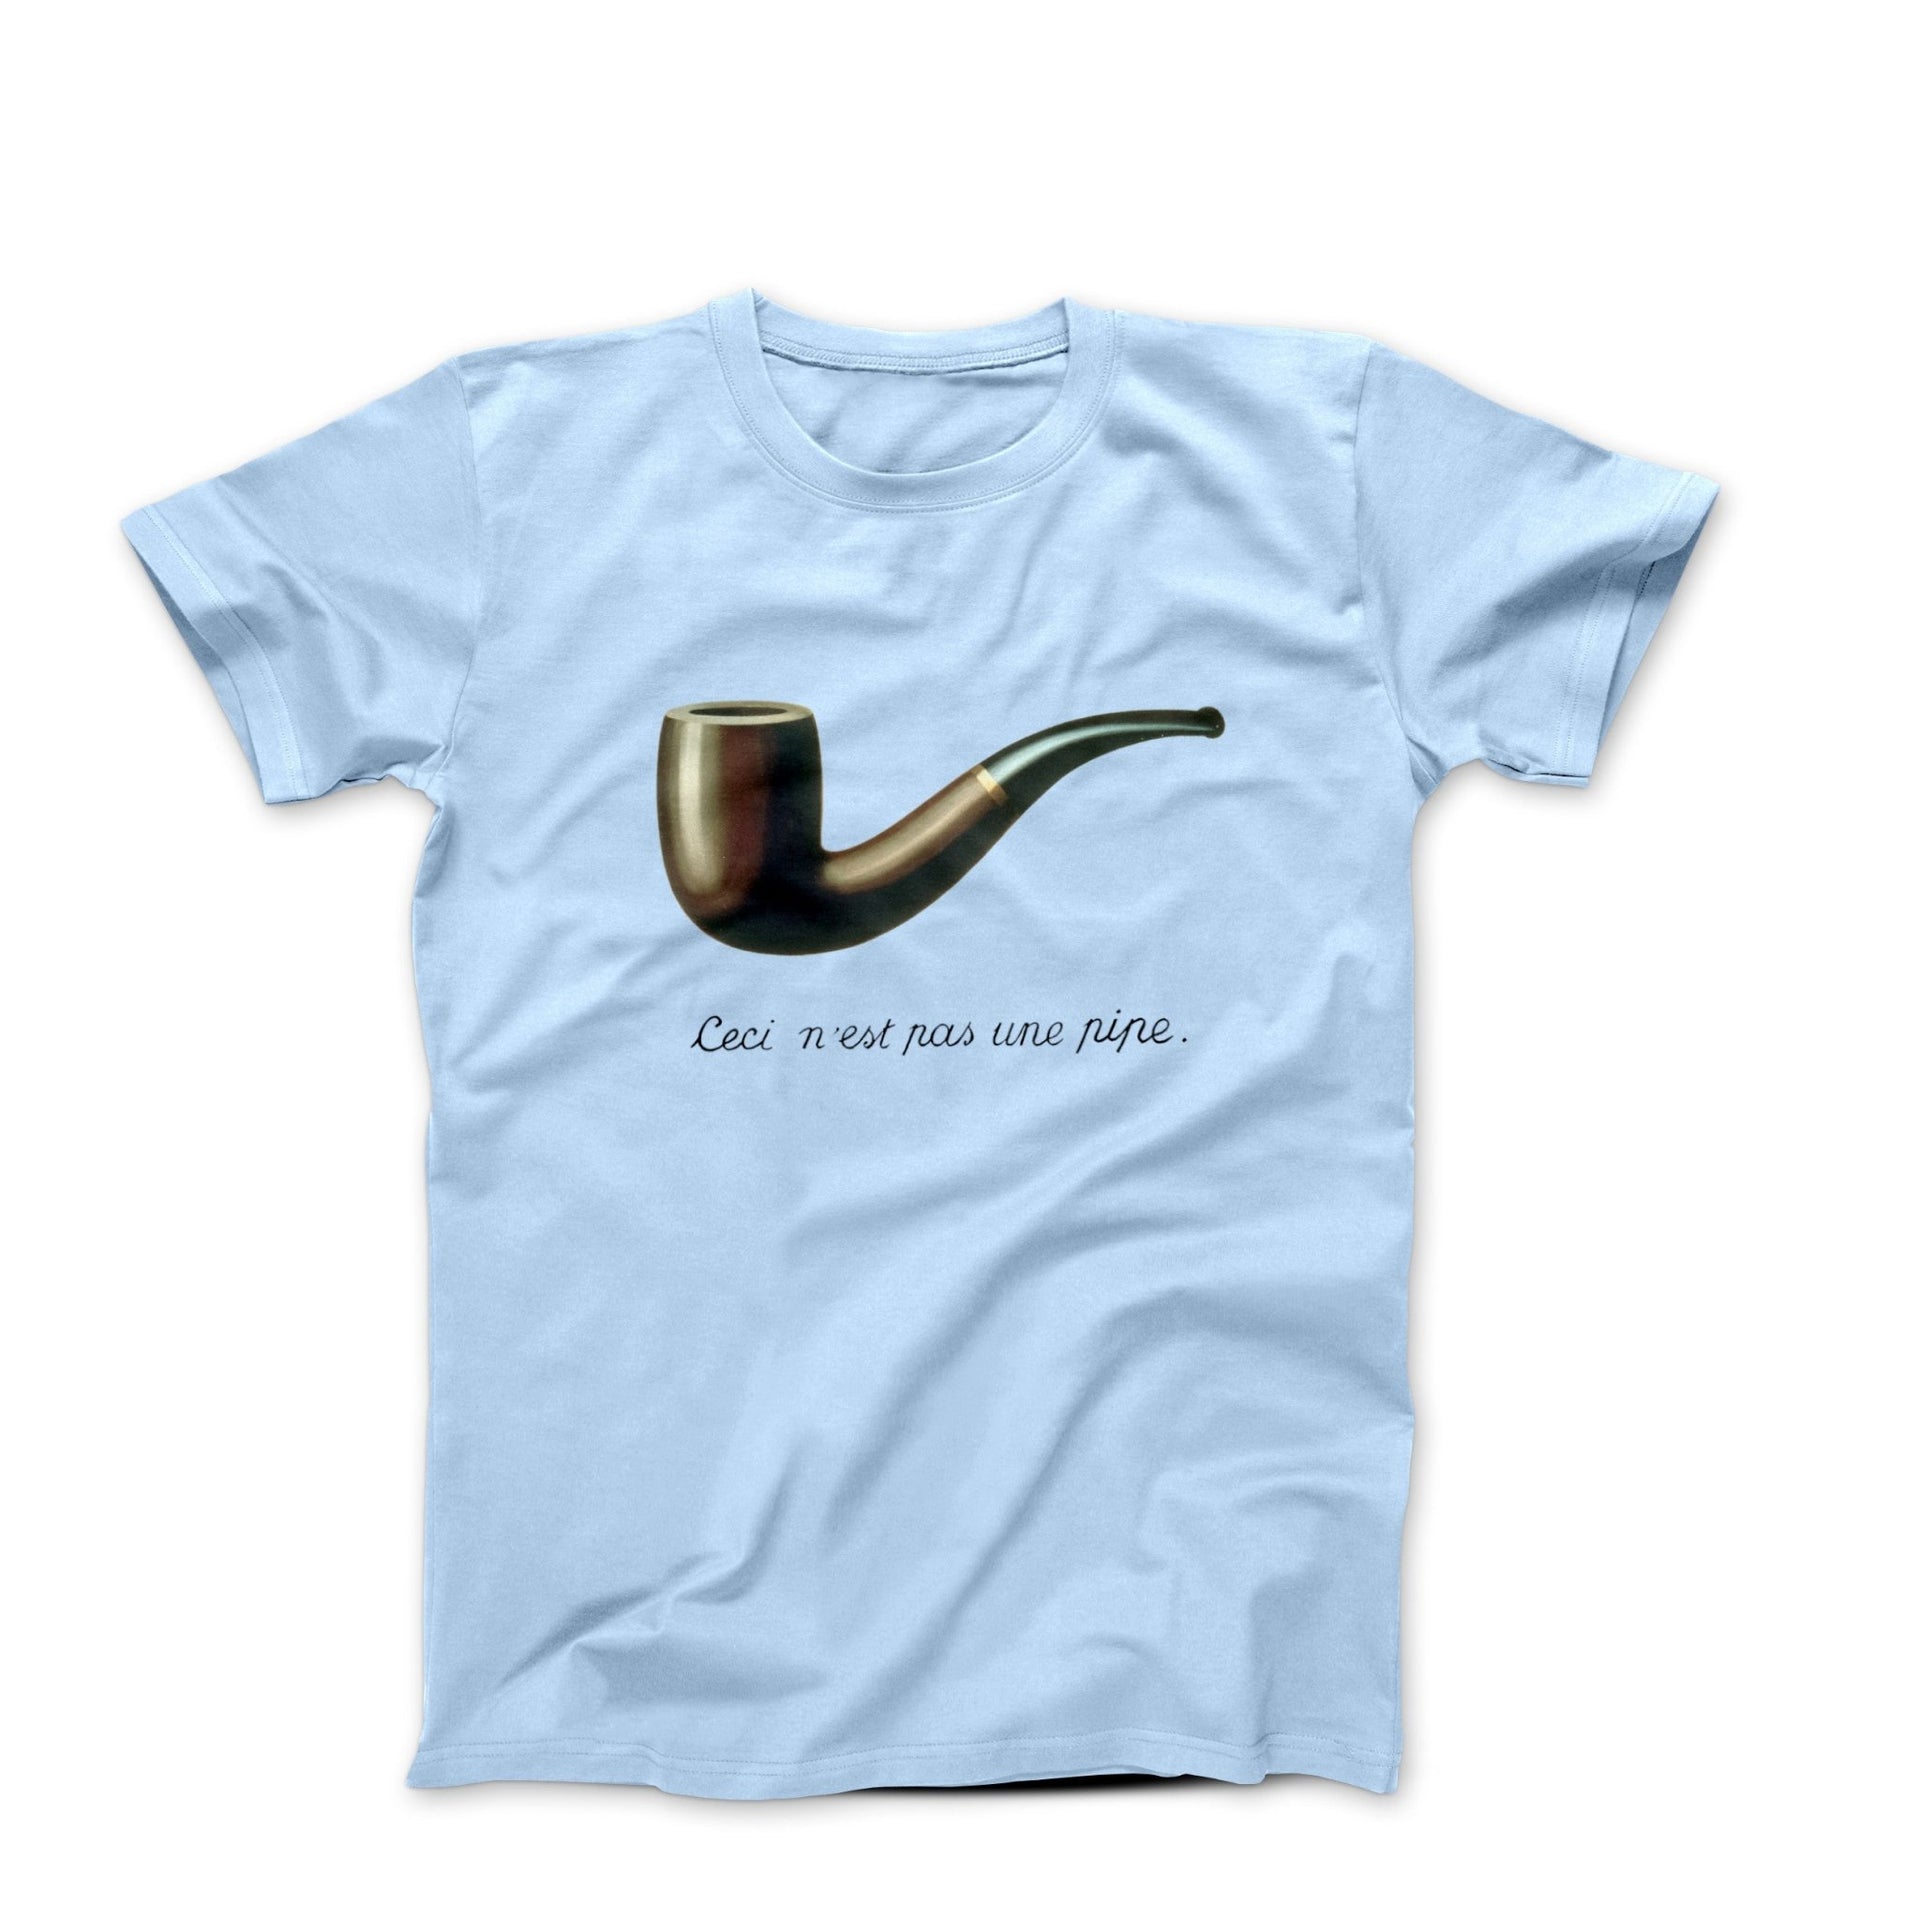 Rene Magritte This Is Not A Pipe (1929) Artwork T-shirt - Clothing - Harvey Ltd